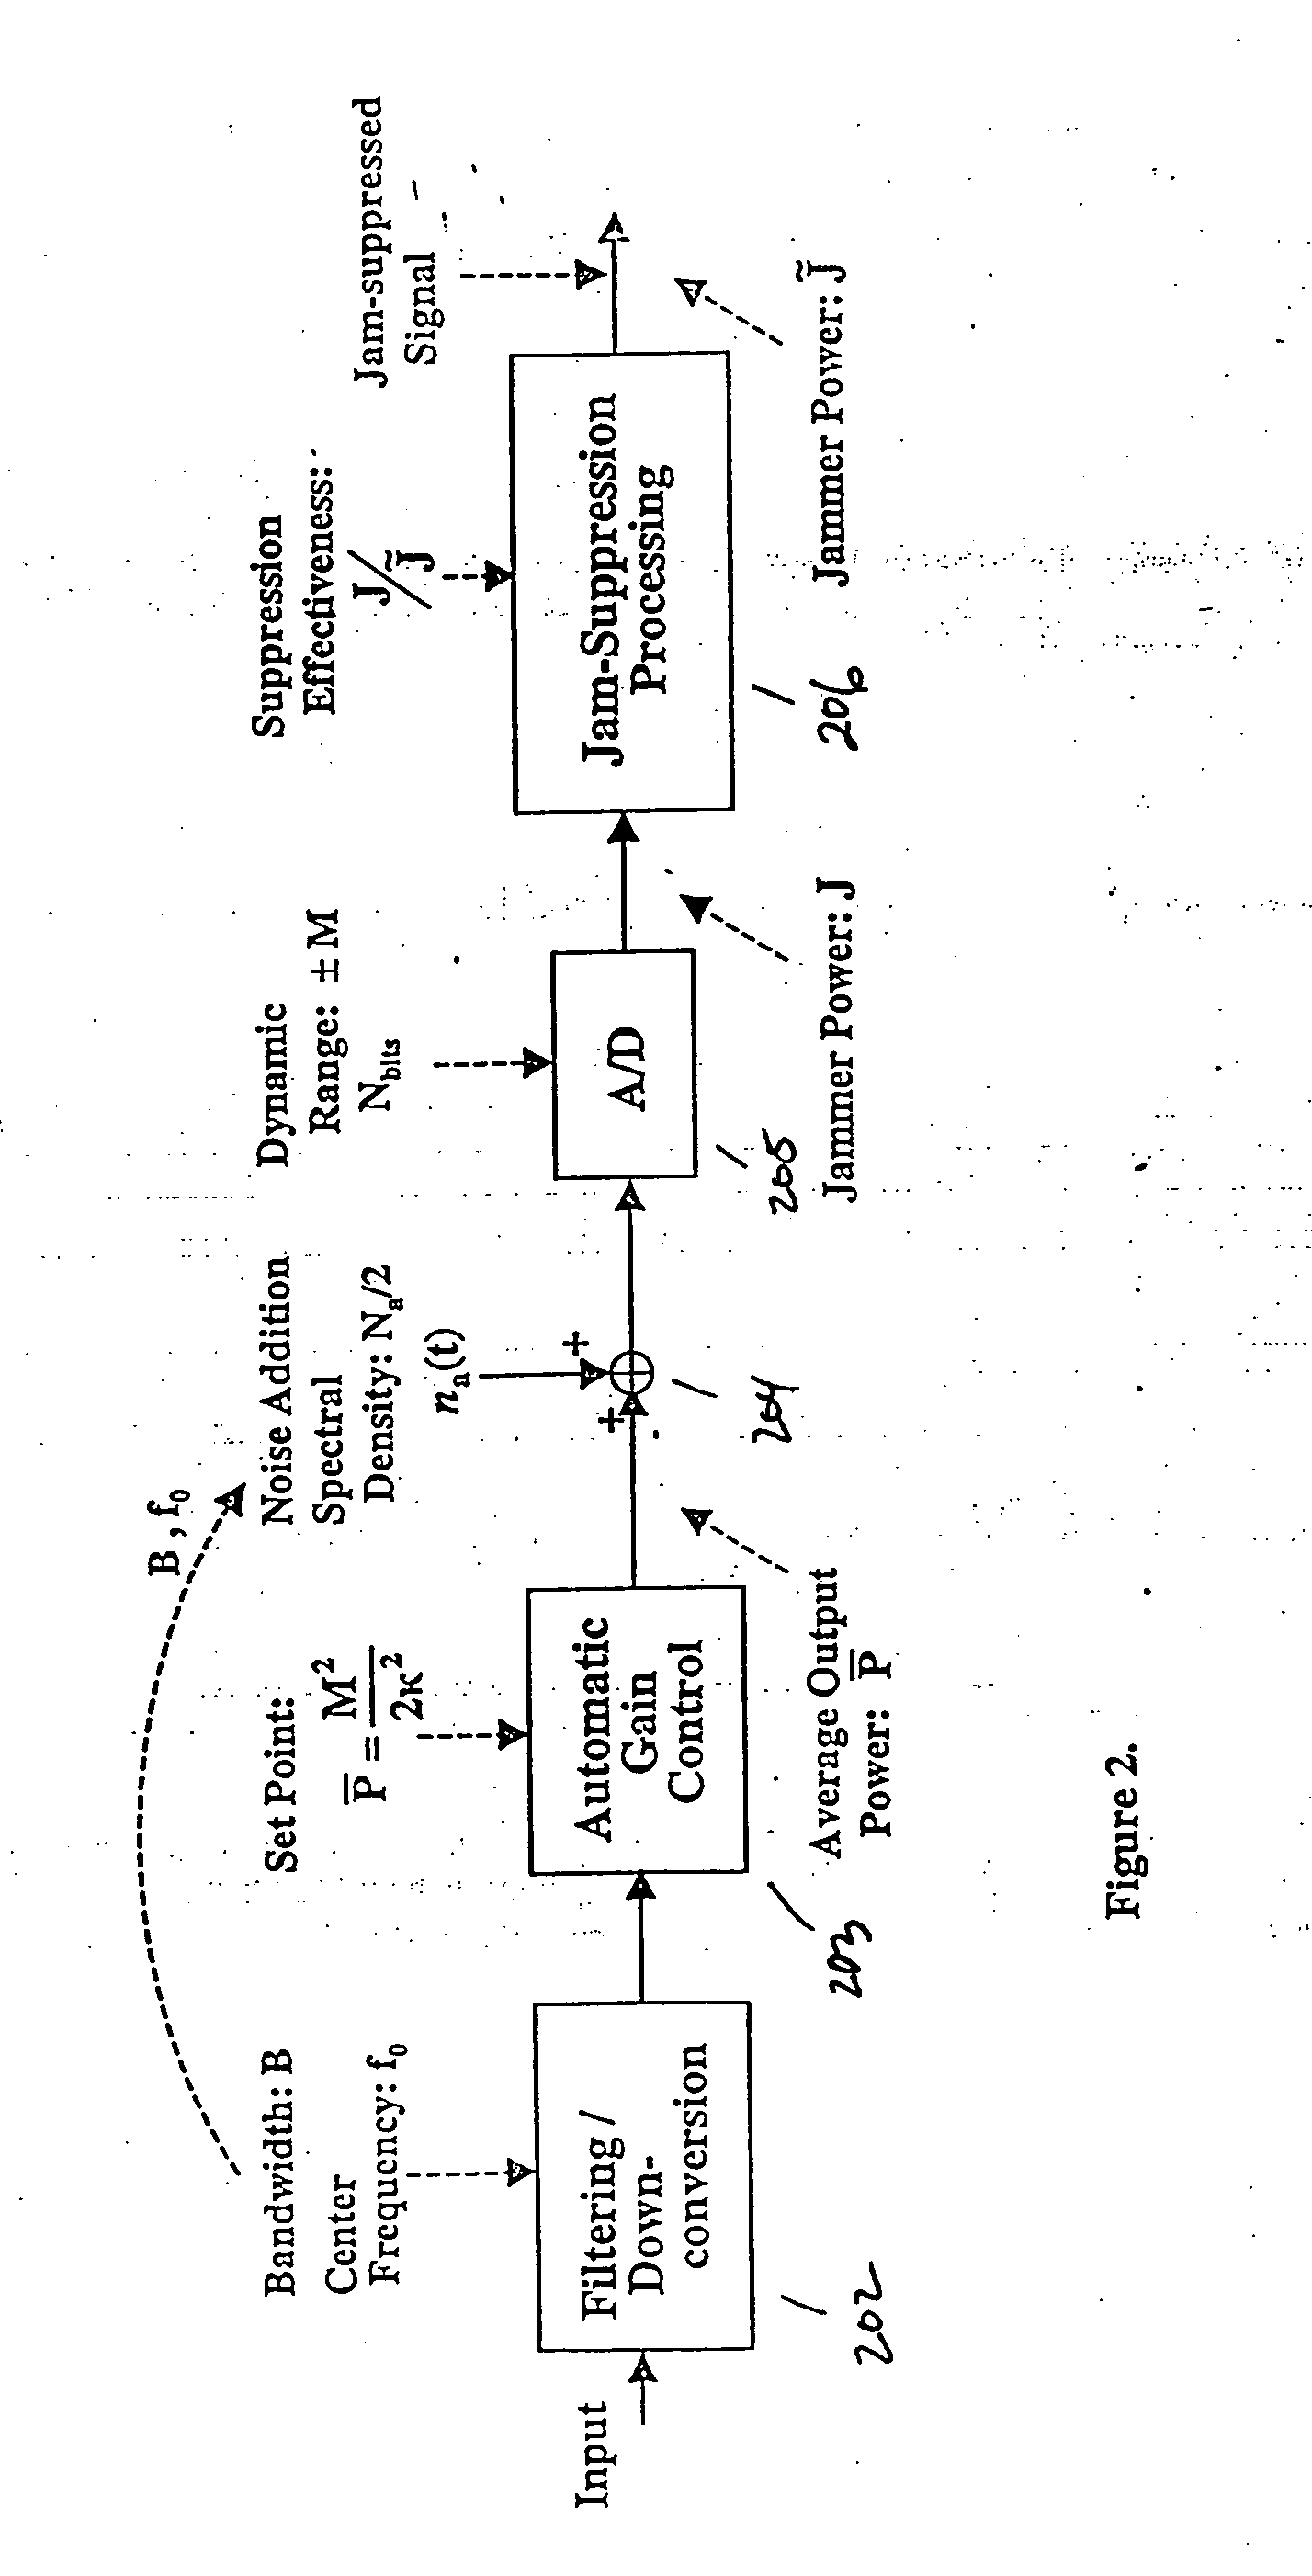 Bit depth reduction for analog to digital conversion in global positioning system